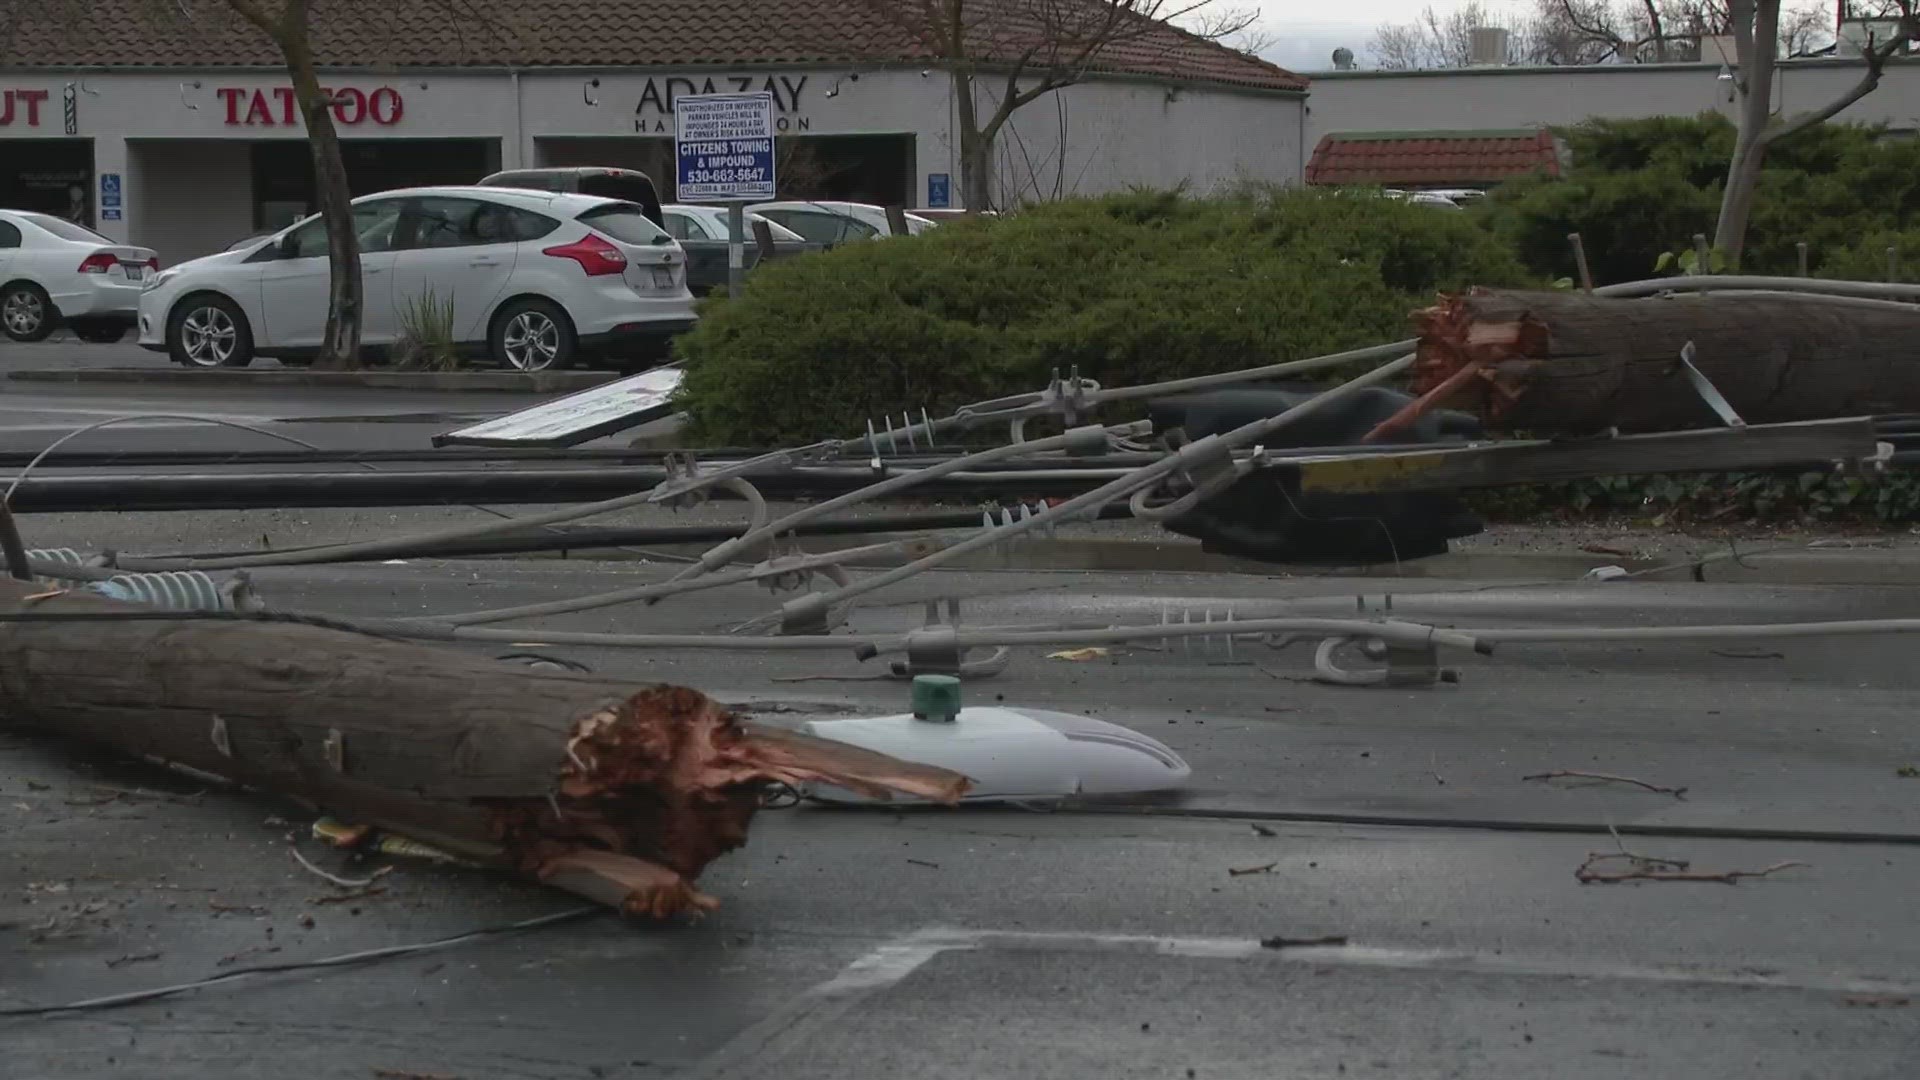 Powerful winds, rain and hail wreaked havoc in Northern California. Power was knocked out in Woodland and trees were toppled.